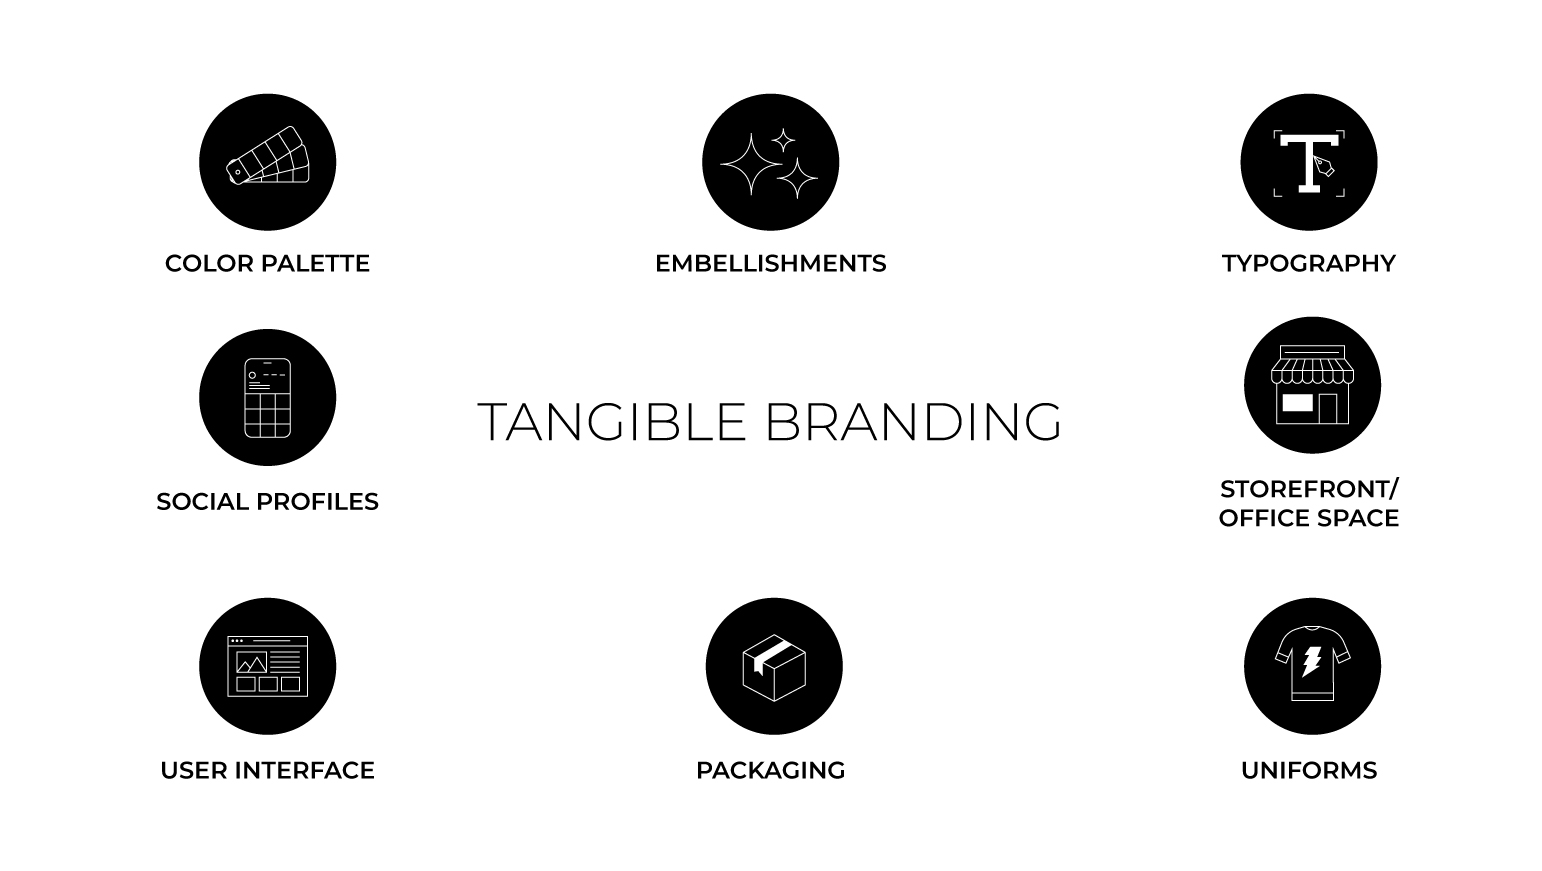 Tangible Branding Graphic - Color Palette, Social Profiles, User Interface, Embellishments, Packaging, Typography, Storefront/Office Space, Uniforms